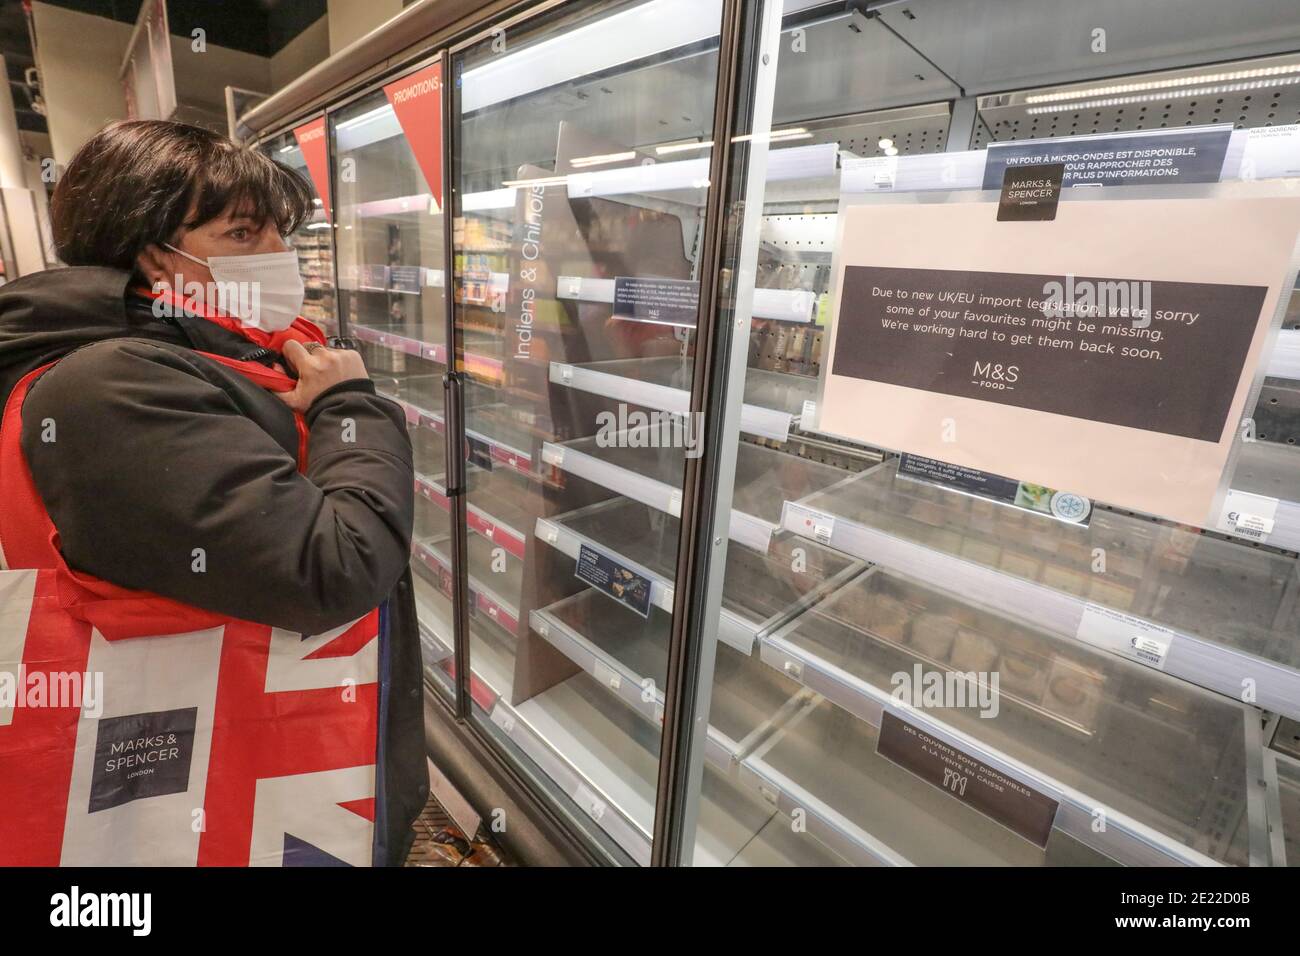 BREXIT FOOD SHORTAGES IN FRANCE AS MARKS&SPENCER STORES RUN OUT OF FRESH FOOD Stock Photo